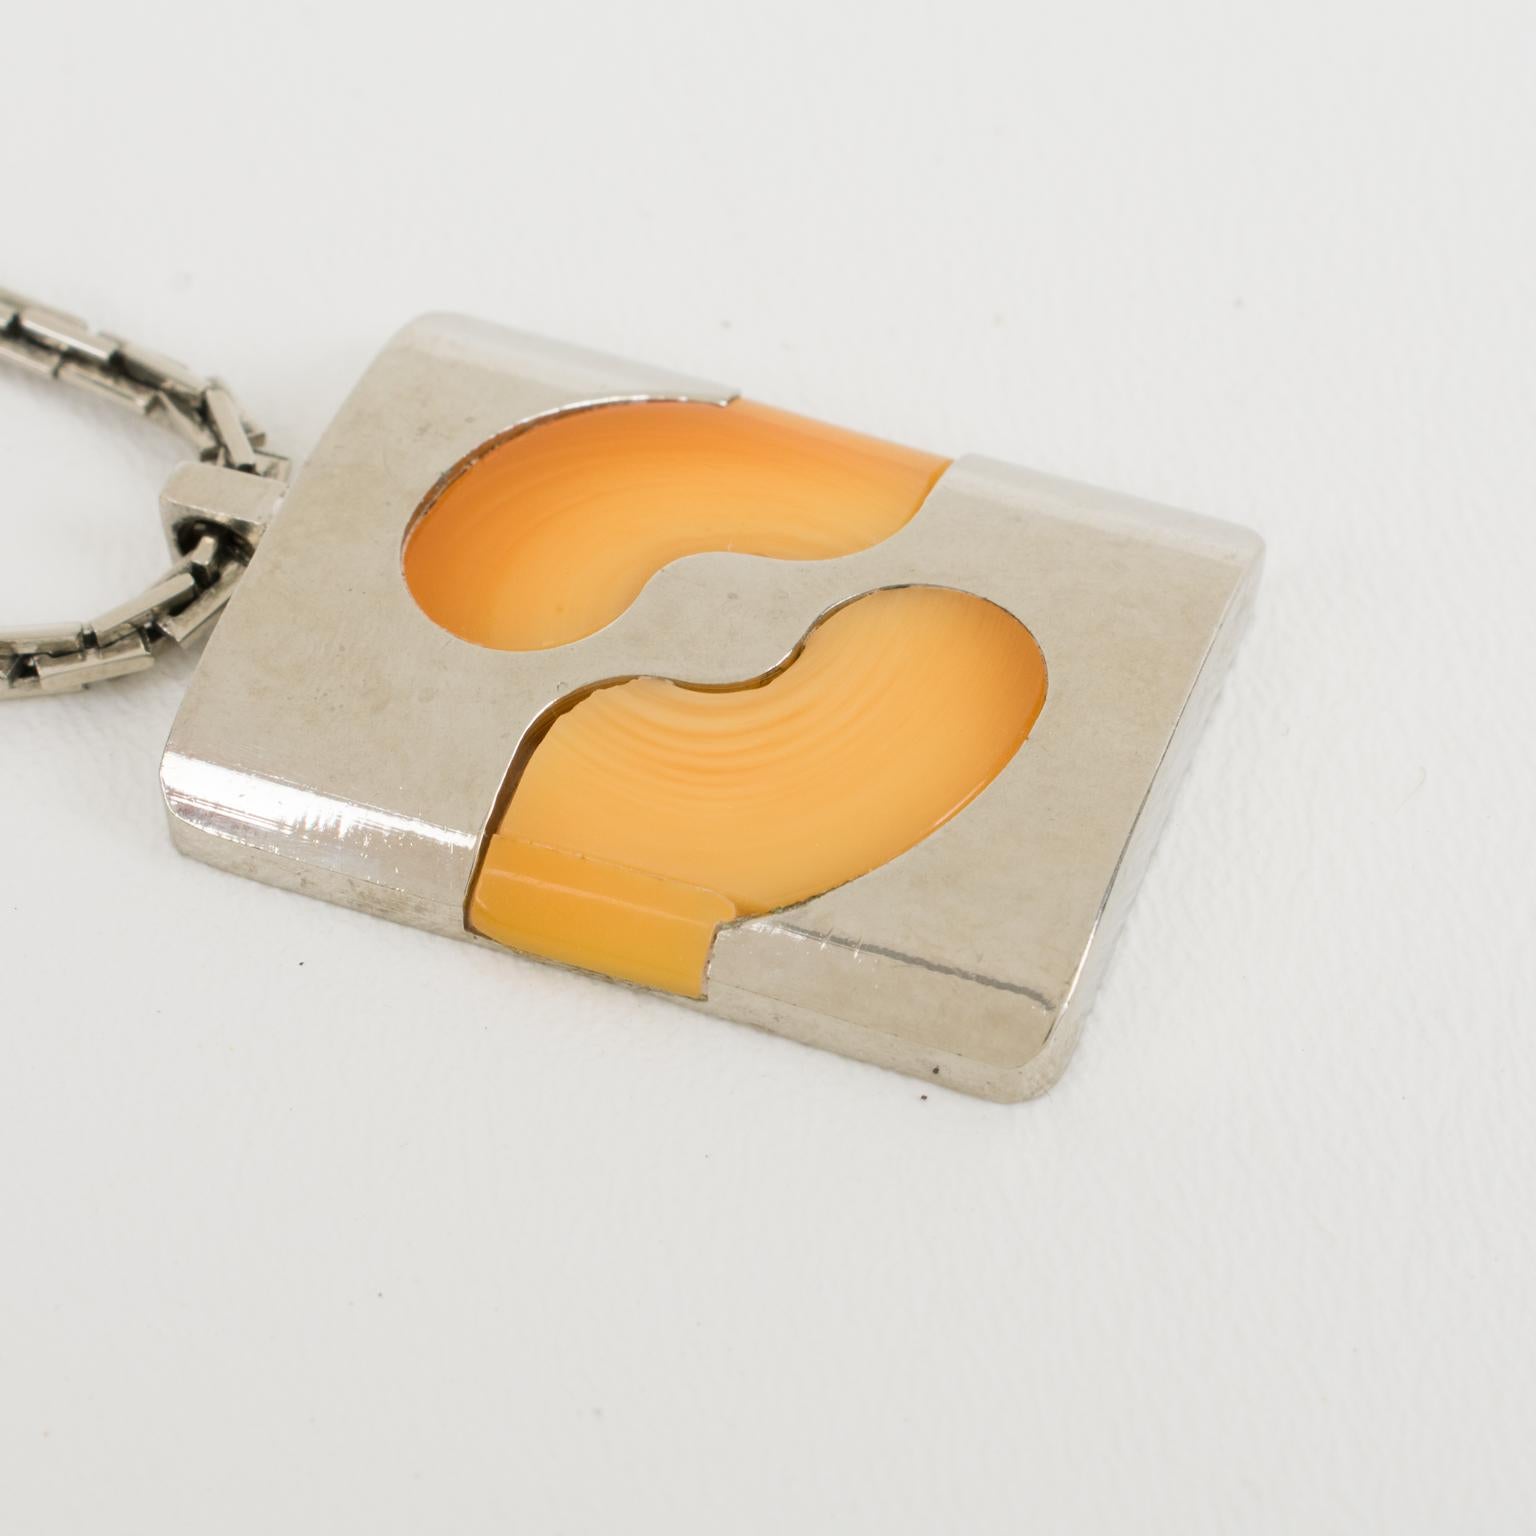 Pierre Cardin Modernist Silvered  and Yellow Resin Pendant Necklace, 1970s For Sale 4